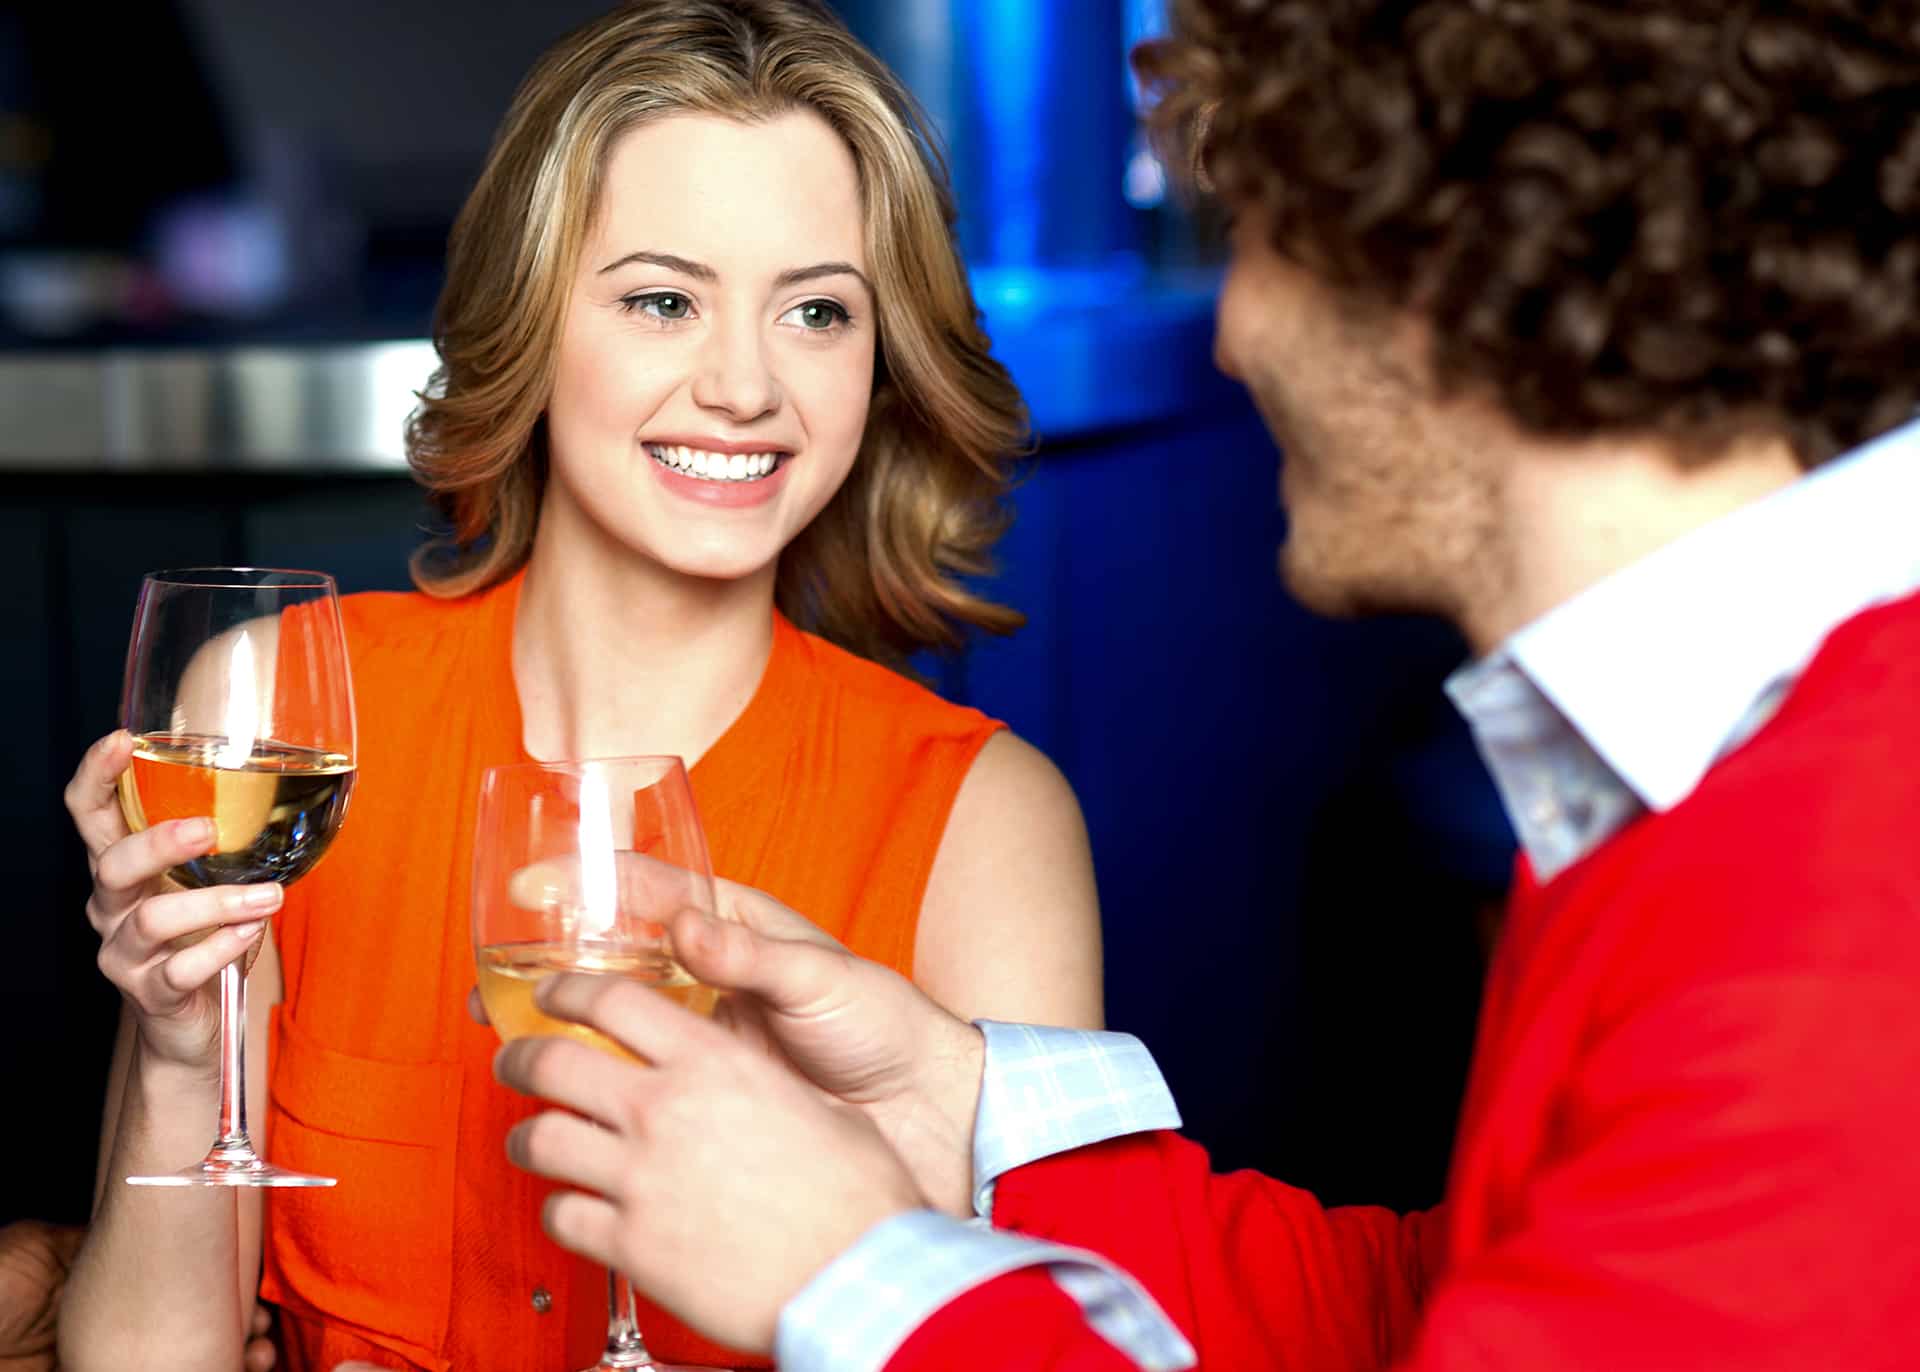 young couple in a bar drinking wine